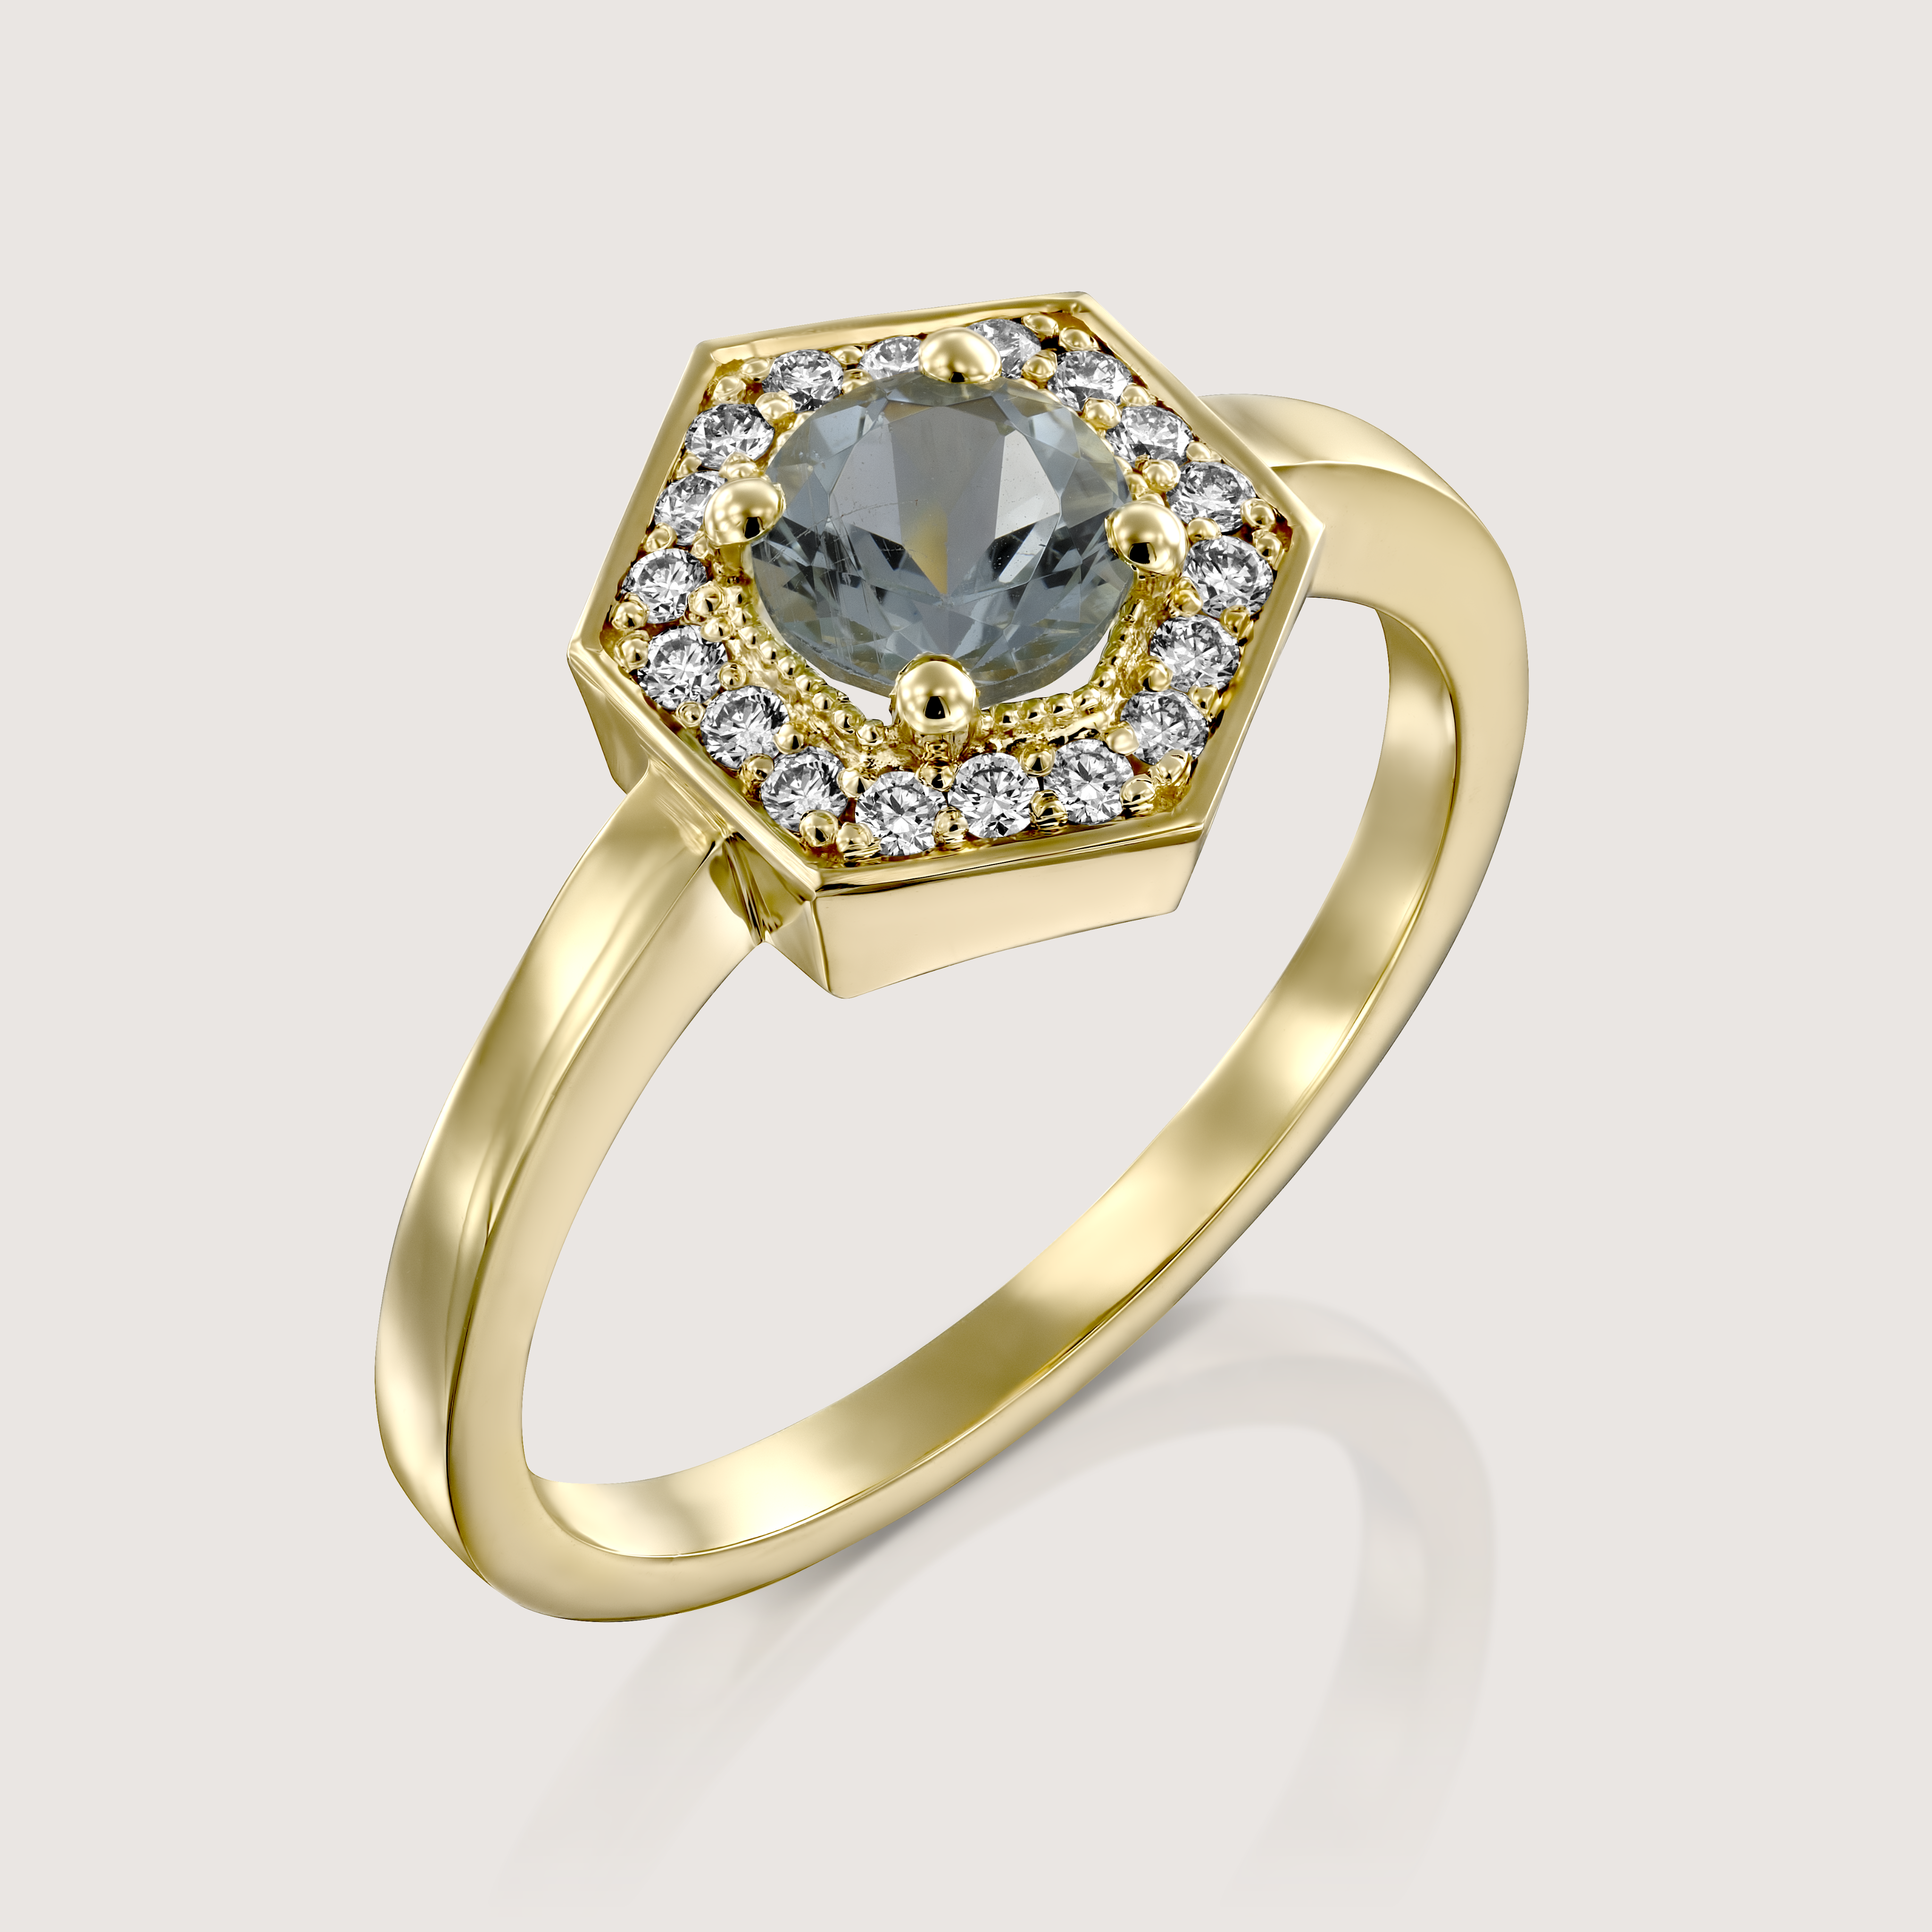 Amy Gold Ring with Aquamarine